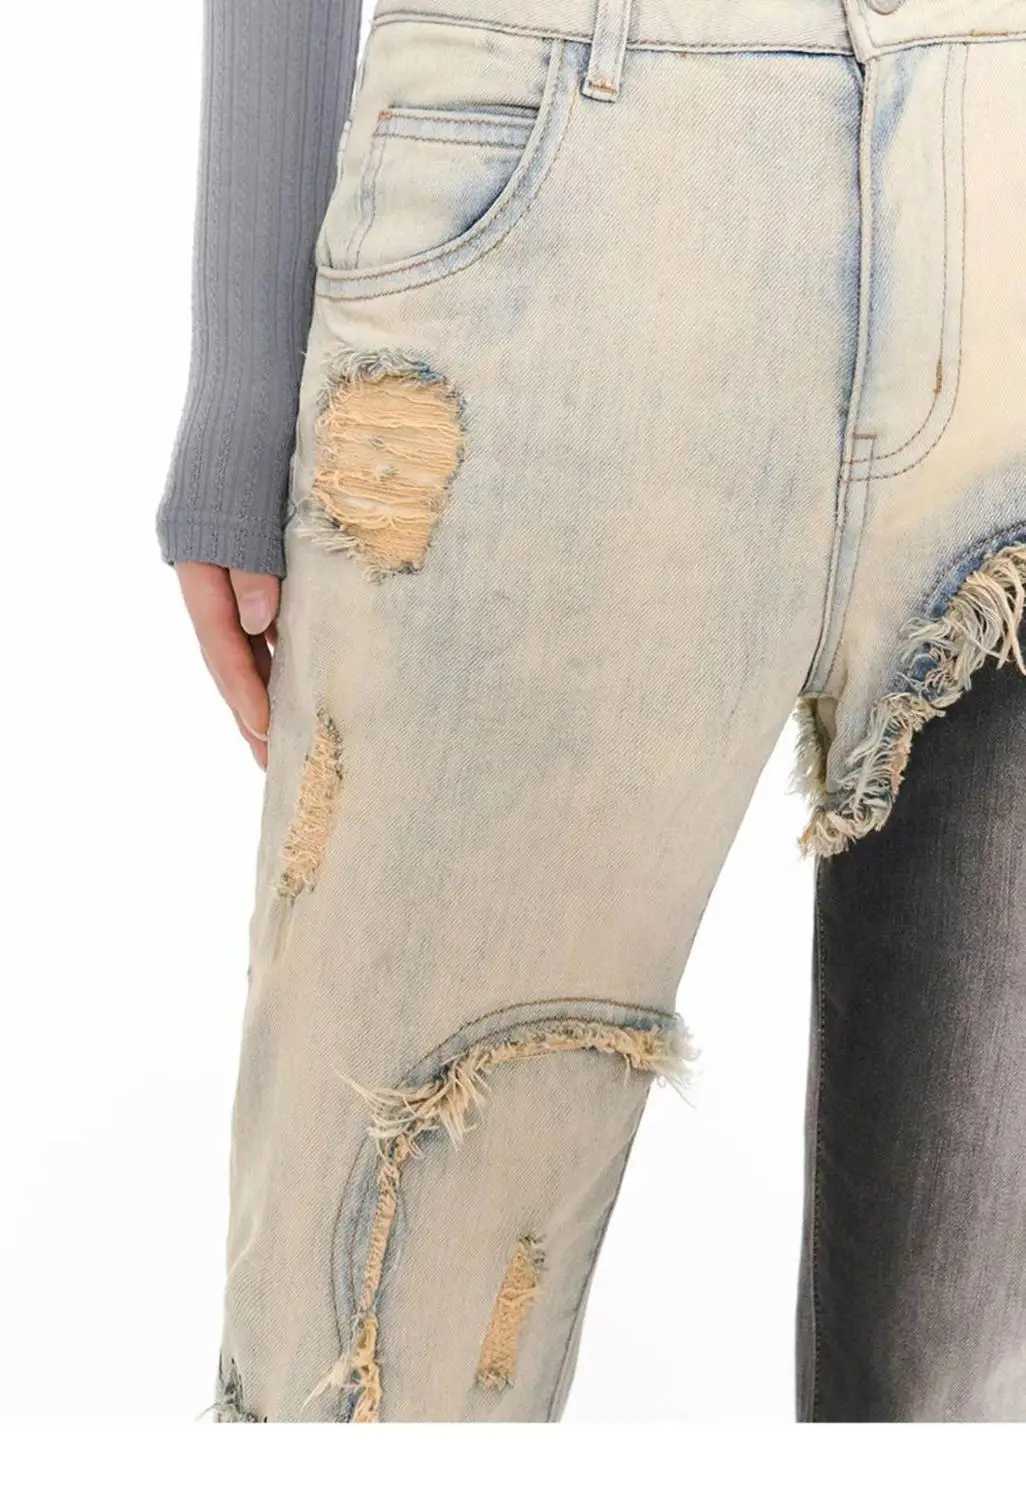 Women's Jeans Hot Bell-bottoms Patchwork Embroidered Khaki Splash-Ink Jeans Women's Spring Autumn High Waist Loose Straight Retro Trousers InsL240105